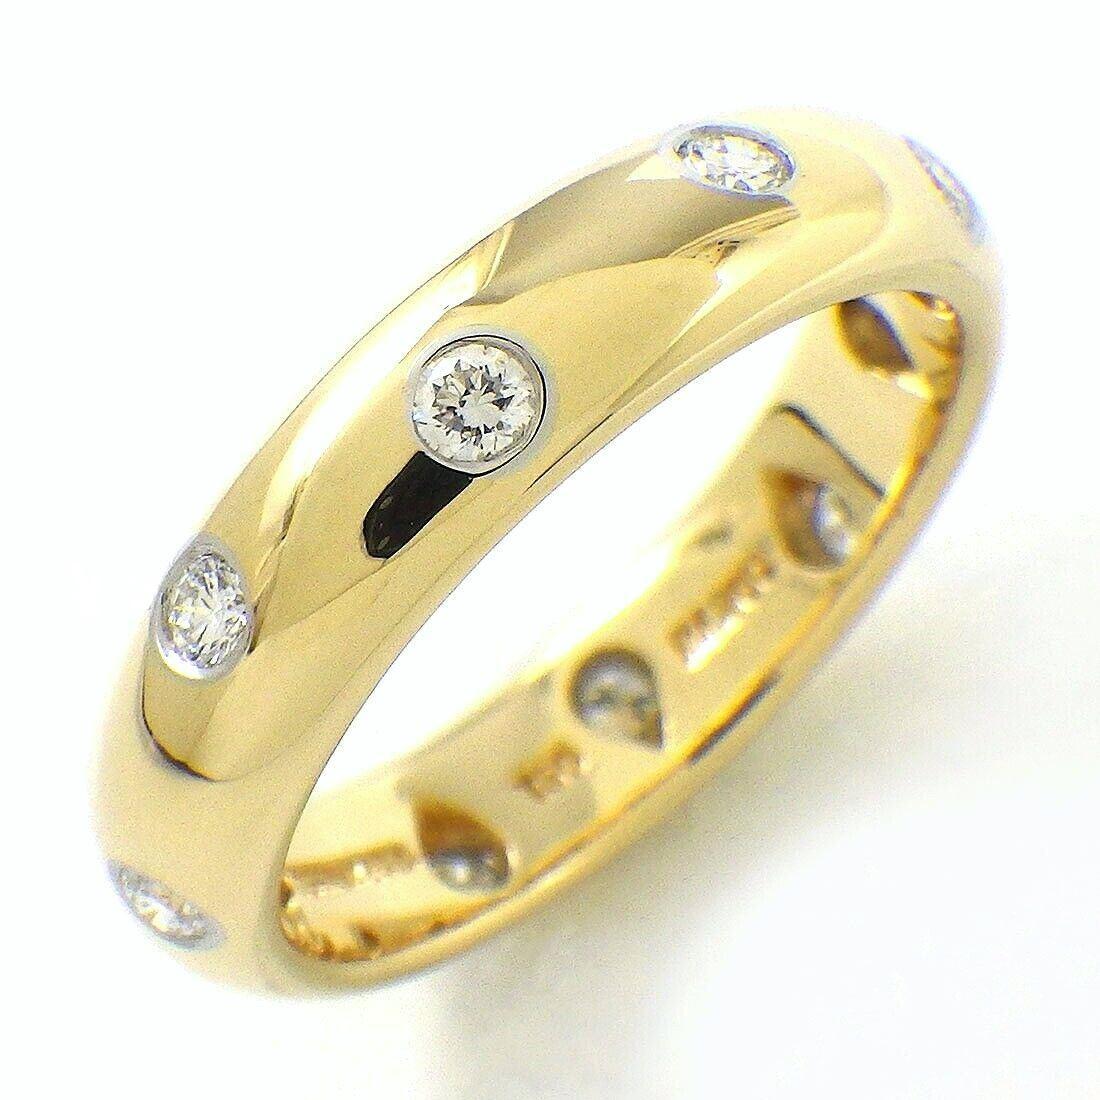 TIFFANY & Co. 18K Gold Diamond Etoile 4mm Band Ring 5

Metal: 18K Gold
Size: 5 
Band Width: 4mm
Diamond: 10 round brilliant diamonds, carat total weight .22
Hallmark: TIFFANY&CO. 750 PT950 
Condition: Excellent condition, like new

Authenticity